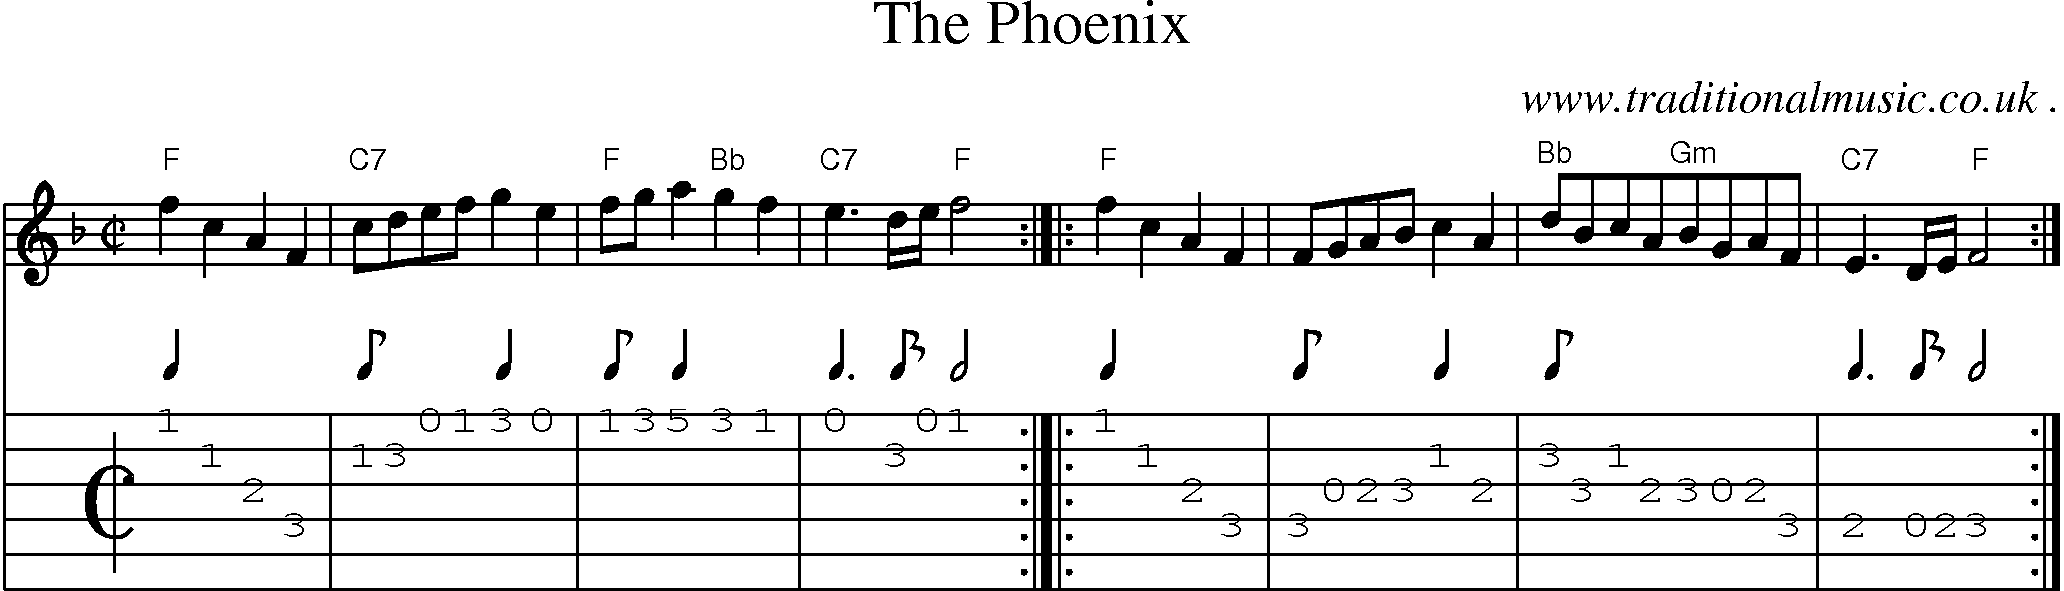 Sheet-Music and Guitar Tabs for The Phoenix